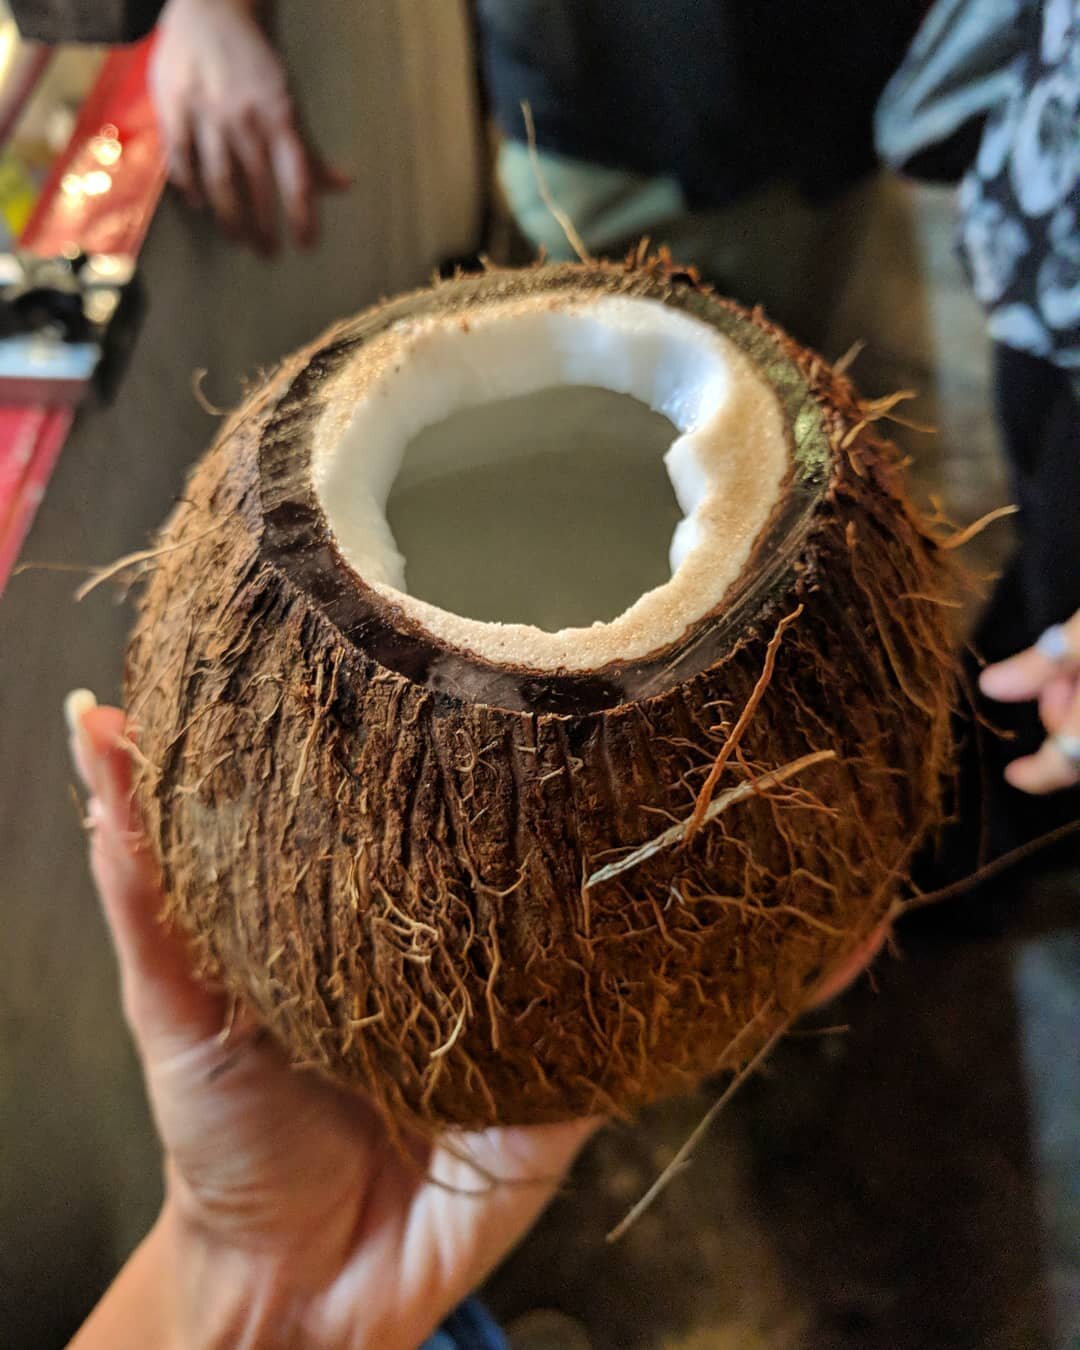 Lucky for me, I have a buddy who can crack me a fresh coconut so I can stay hydrated ;) @pips_coconut_ladies thanks for having the best spot for refreshment at the #sangennarofeast !